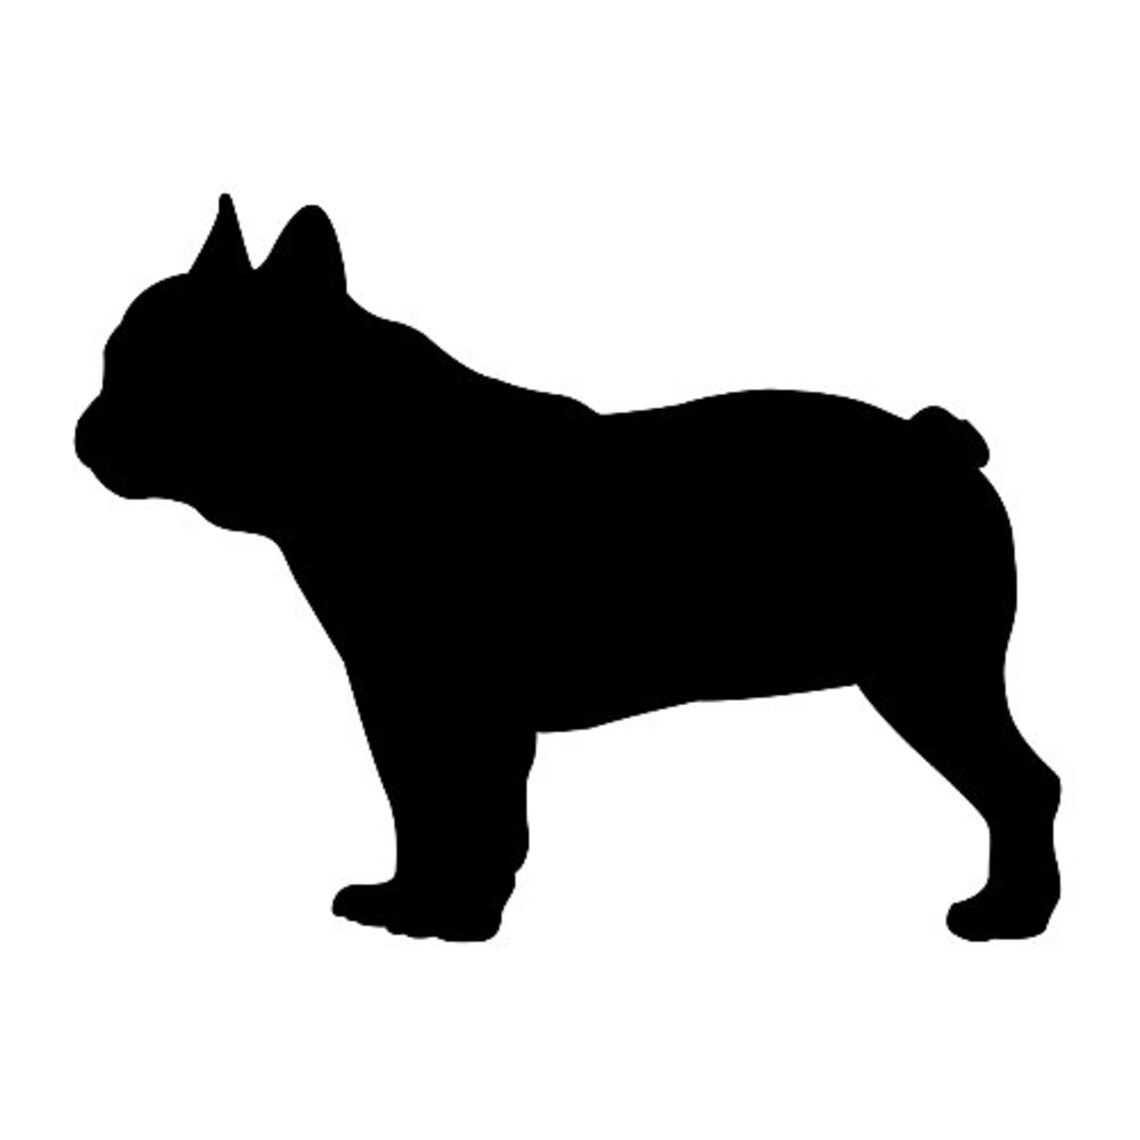 French Bulldog Svg Dxf Eps Png Files Instant Download | Etsy